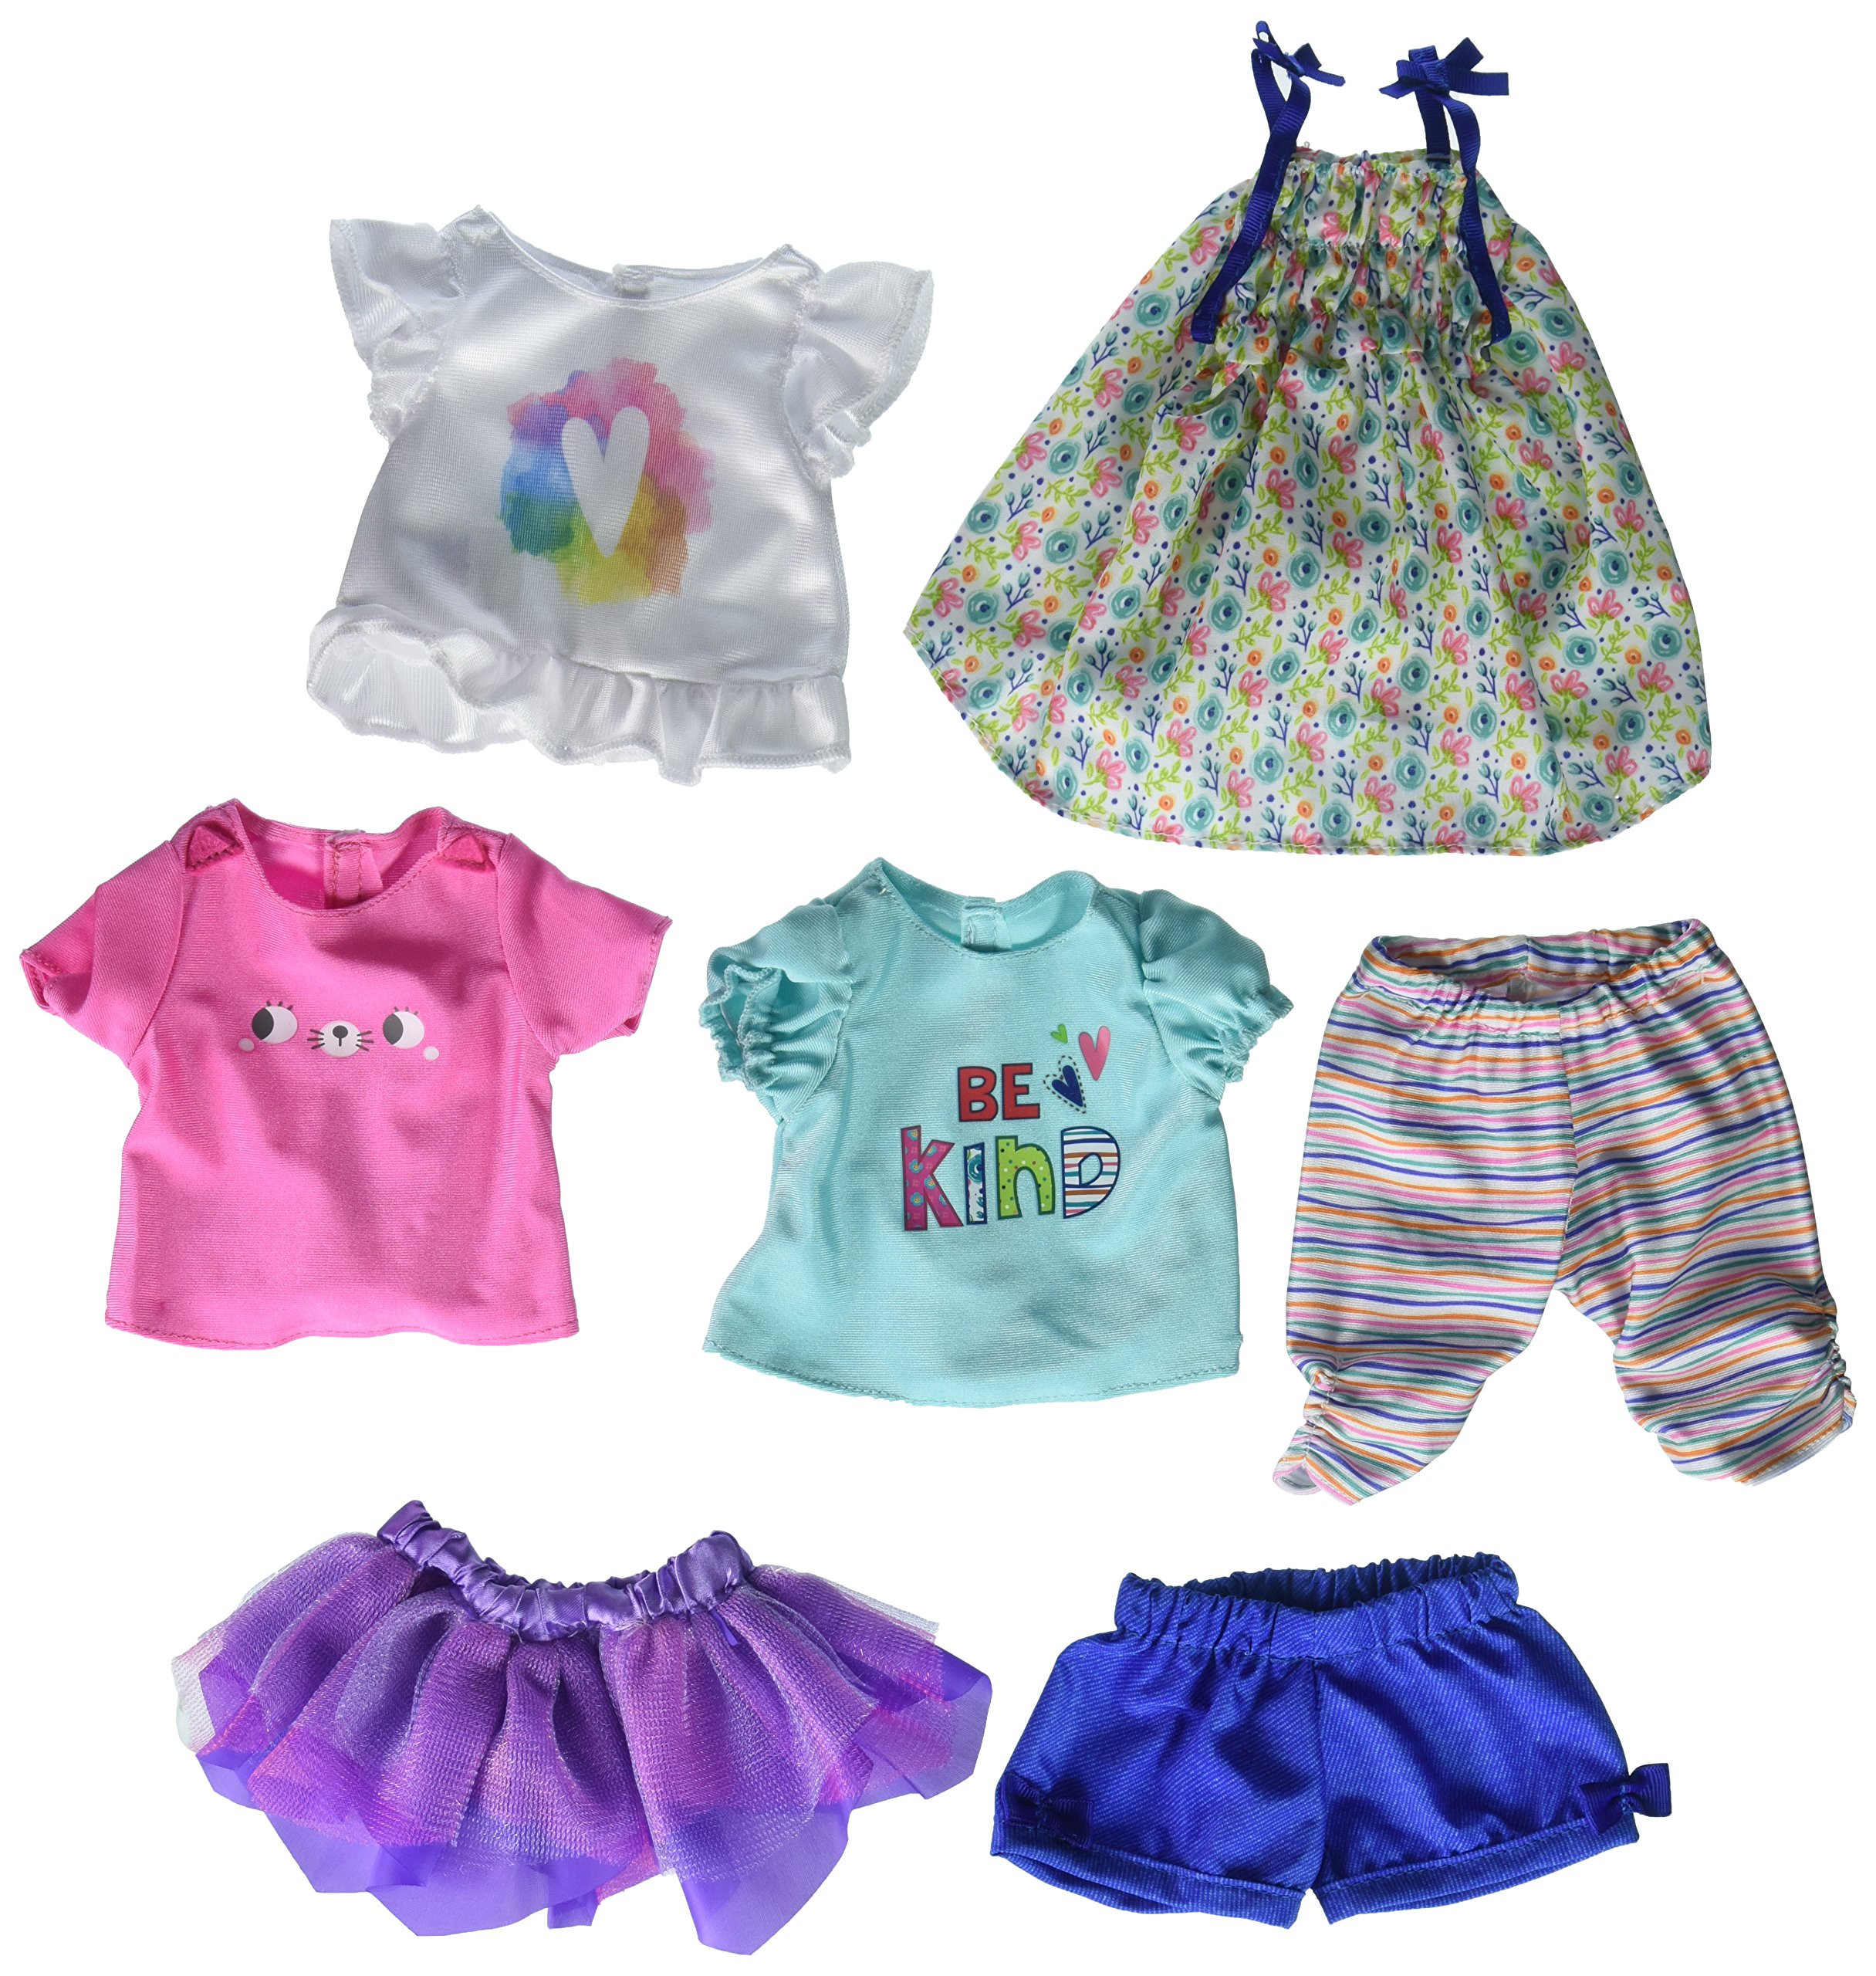 Baby Alive Fashion Set
 Baby Alive Mix N Match Outfit Set